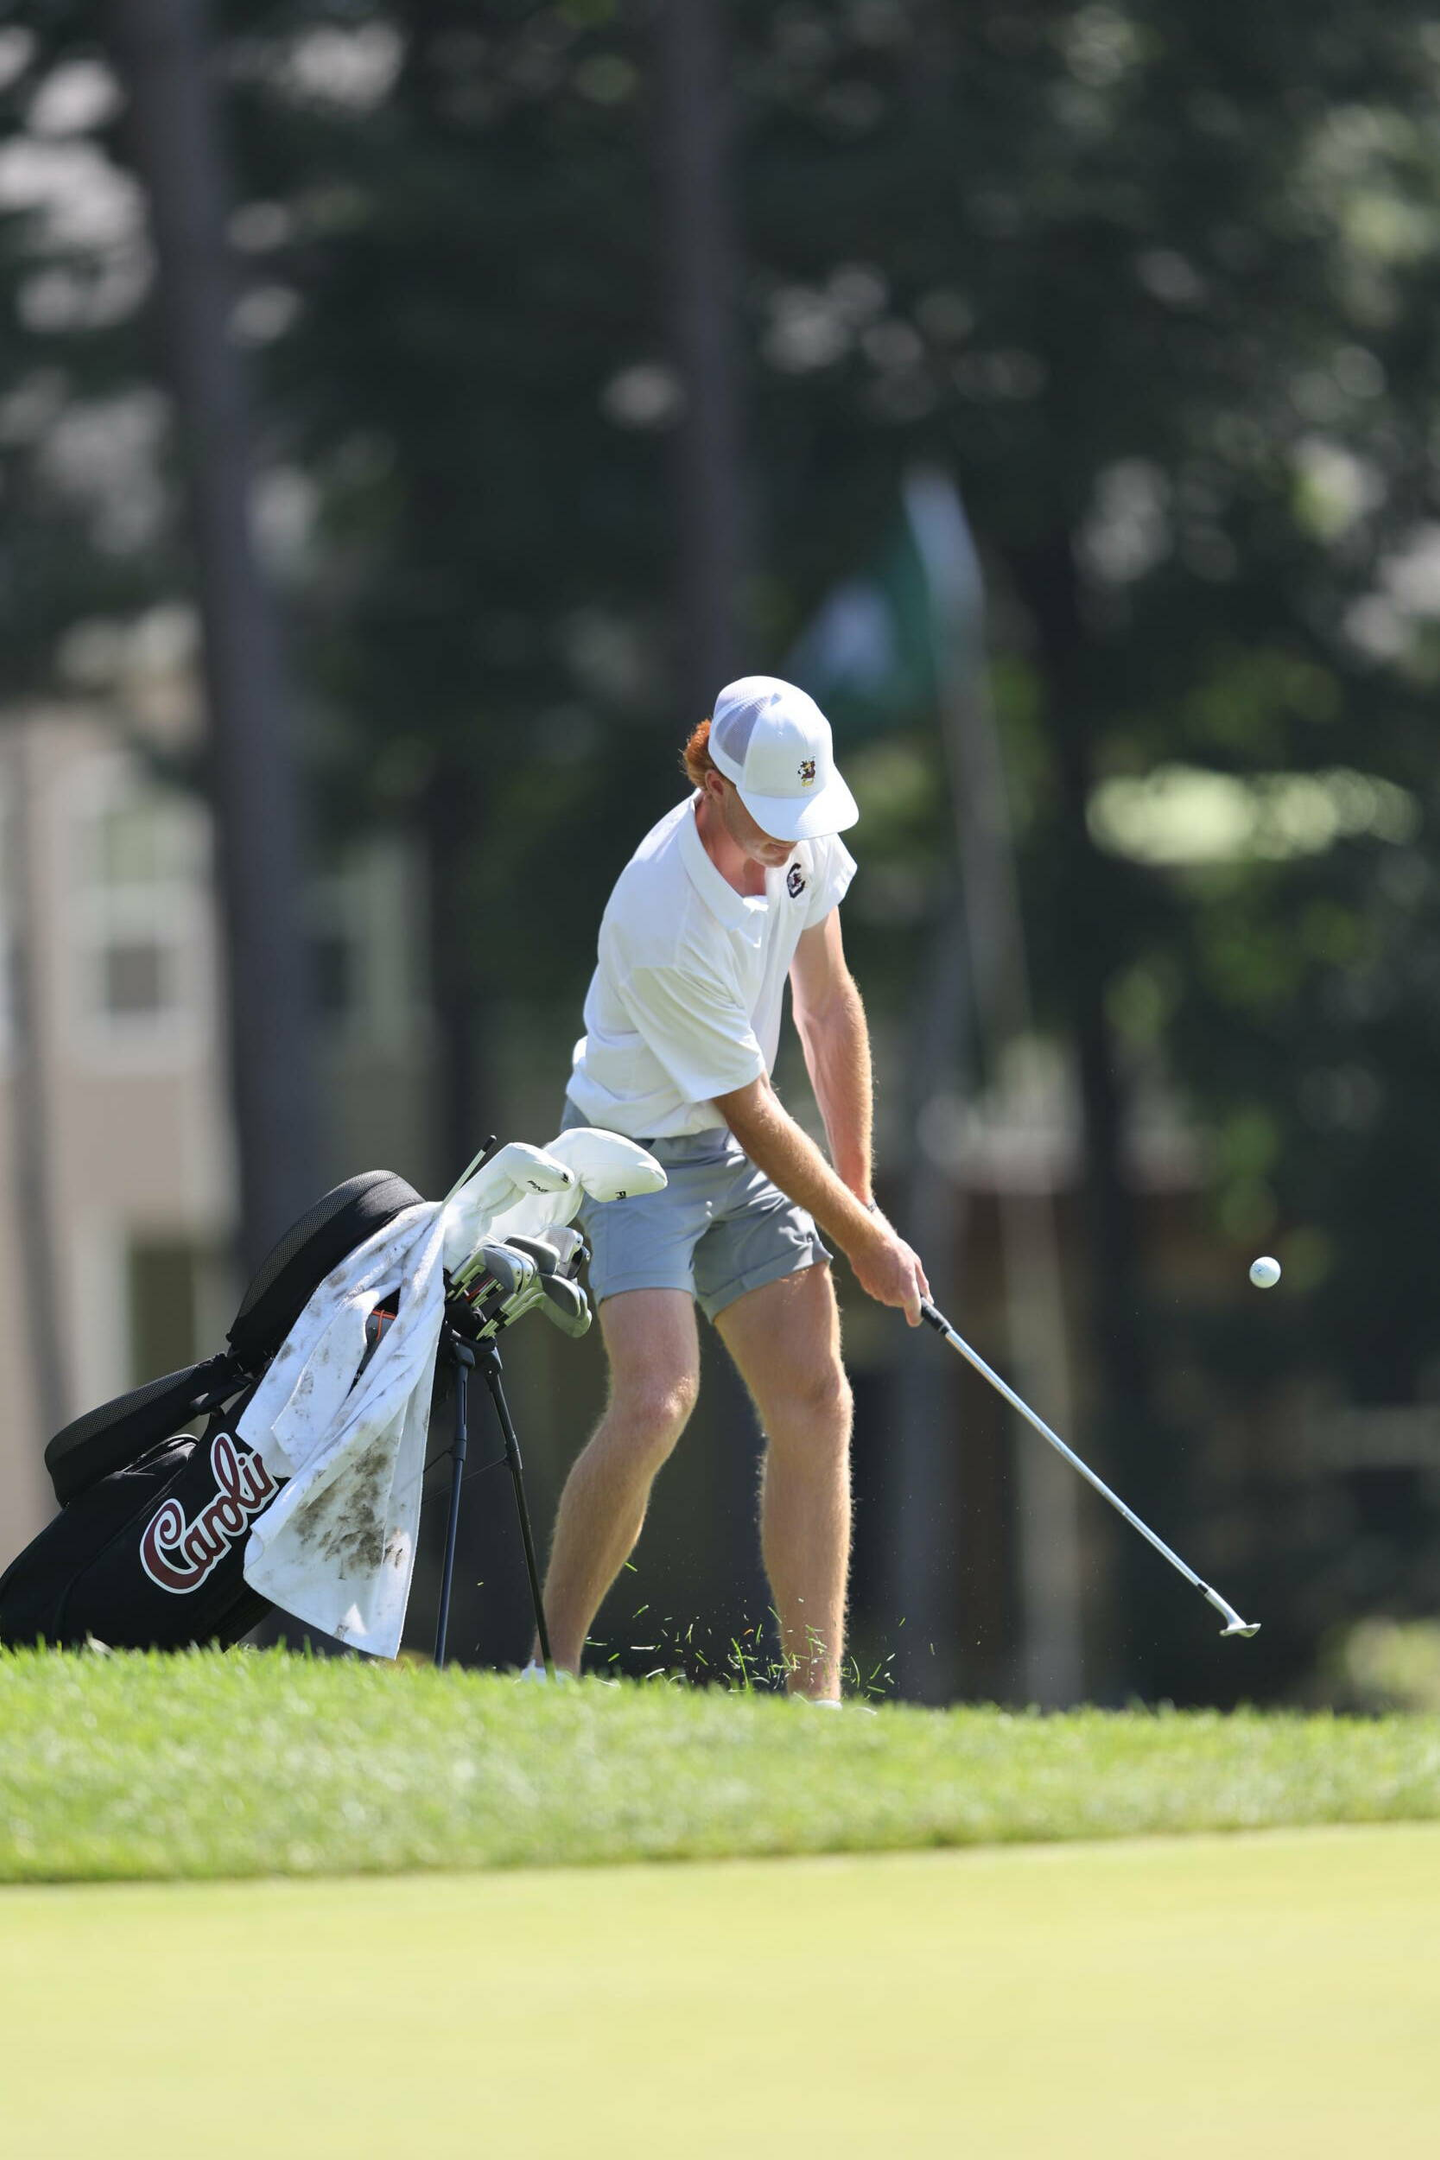 Gamecocks Wrap-Up Day One of SEC Match Play